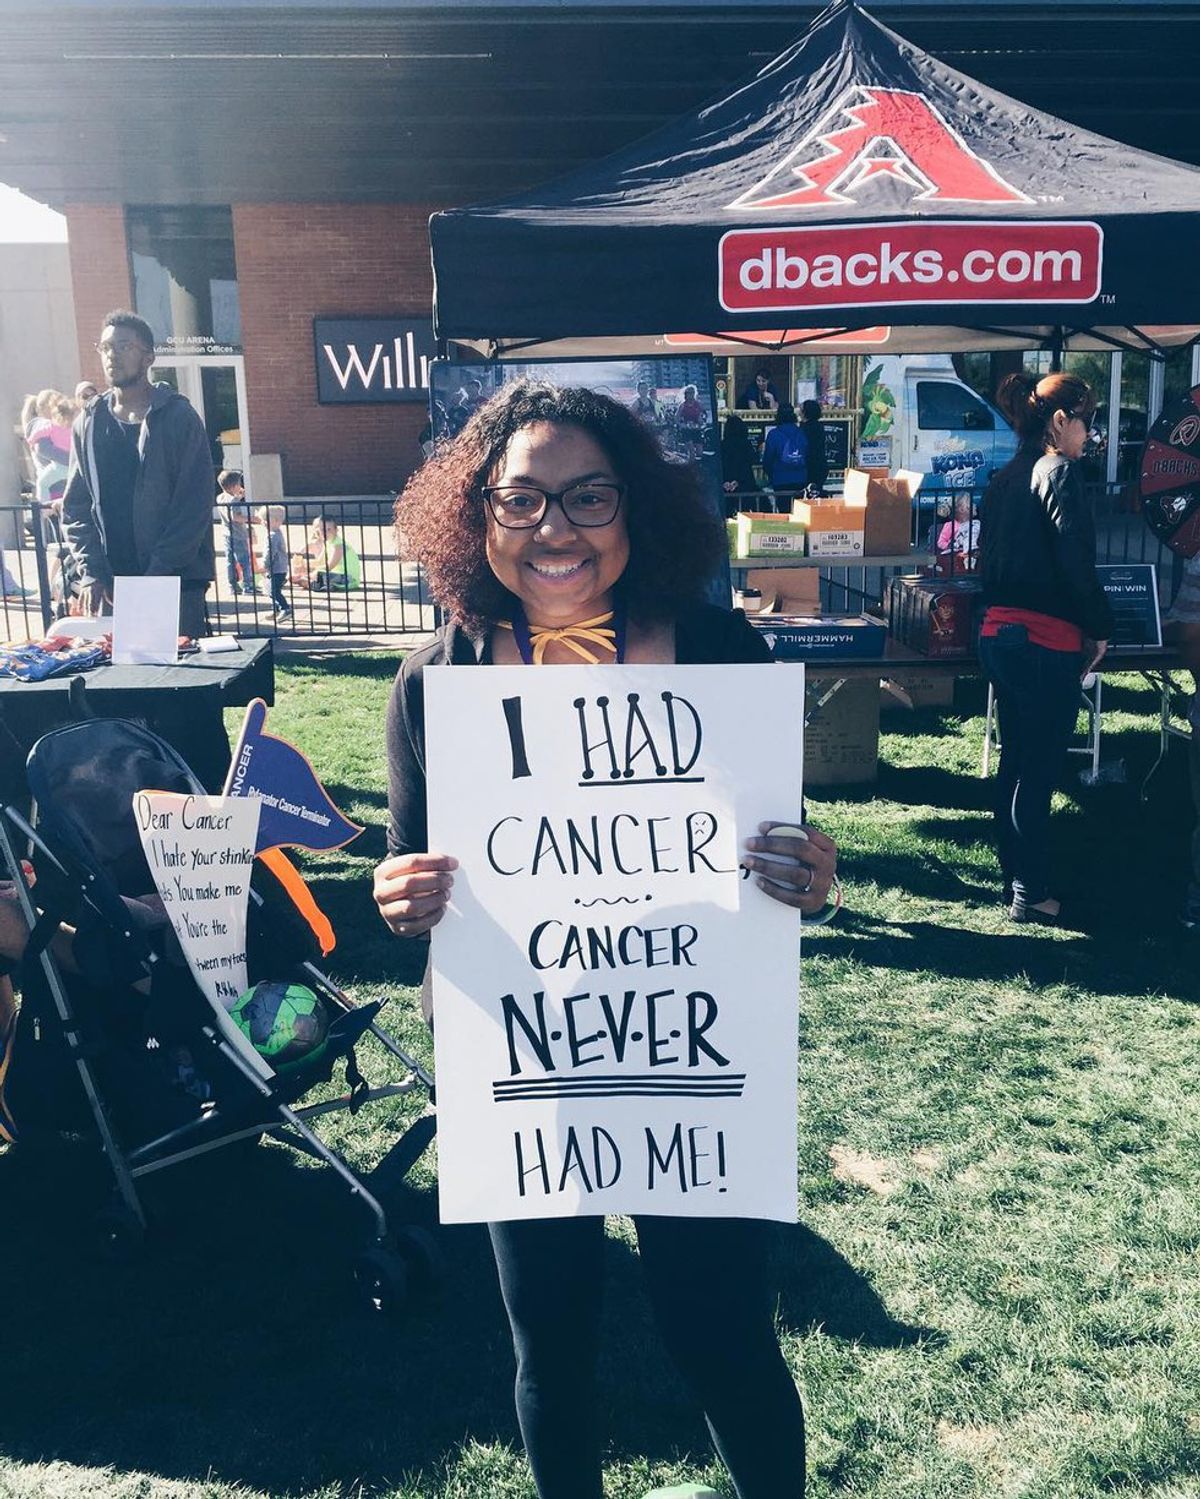 The Truth About Being A Cancer Survivor